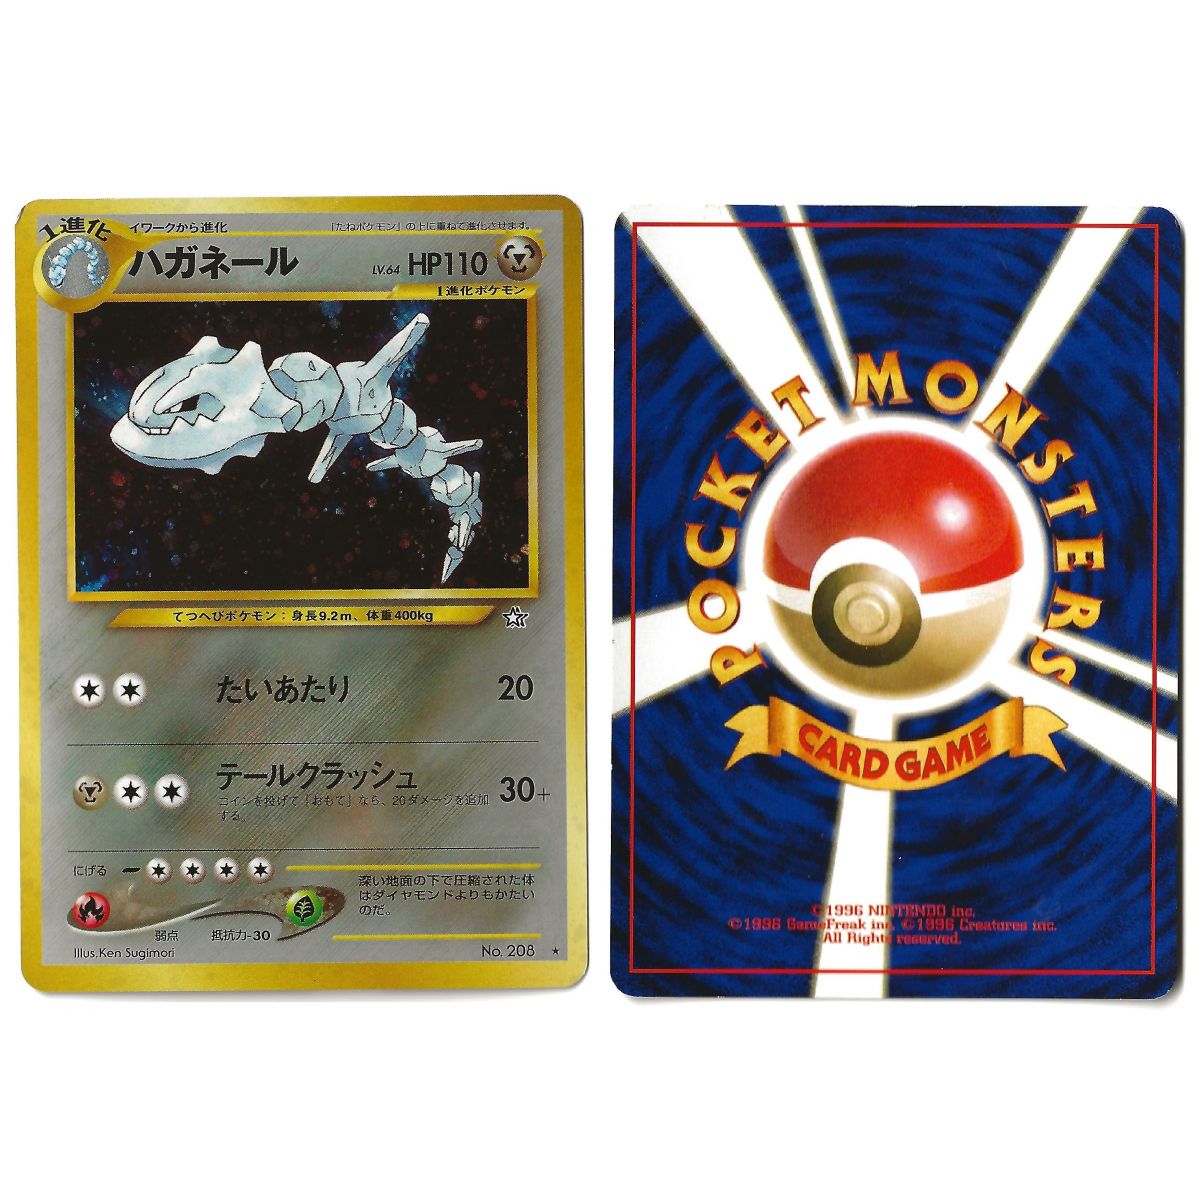 Steelix (1) No.208 Gold, Silver, to a New World... N1 Holo Unlimited Japanese View Scan